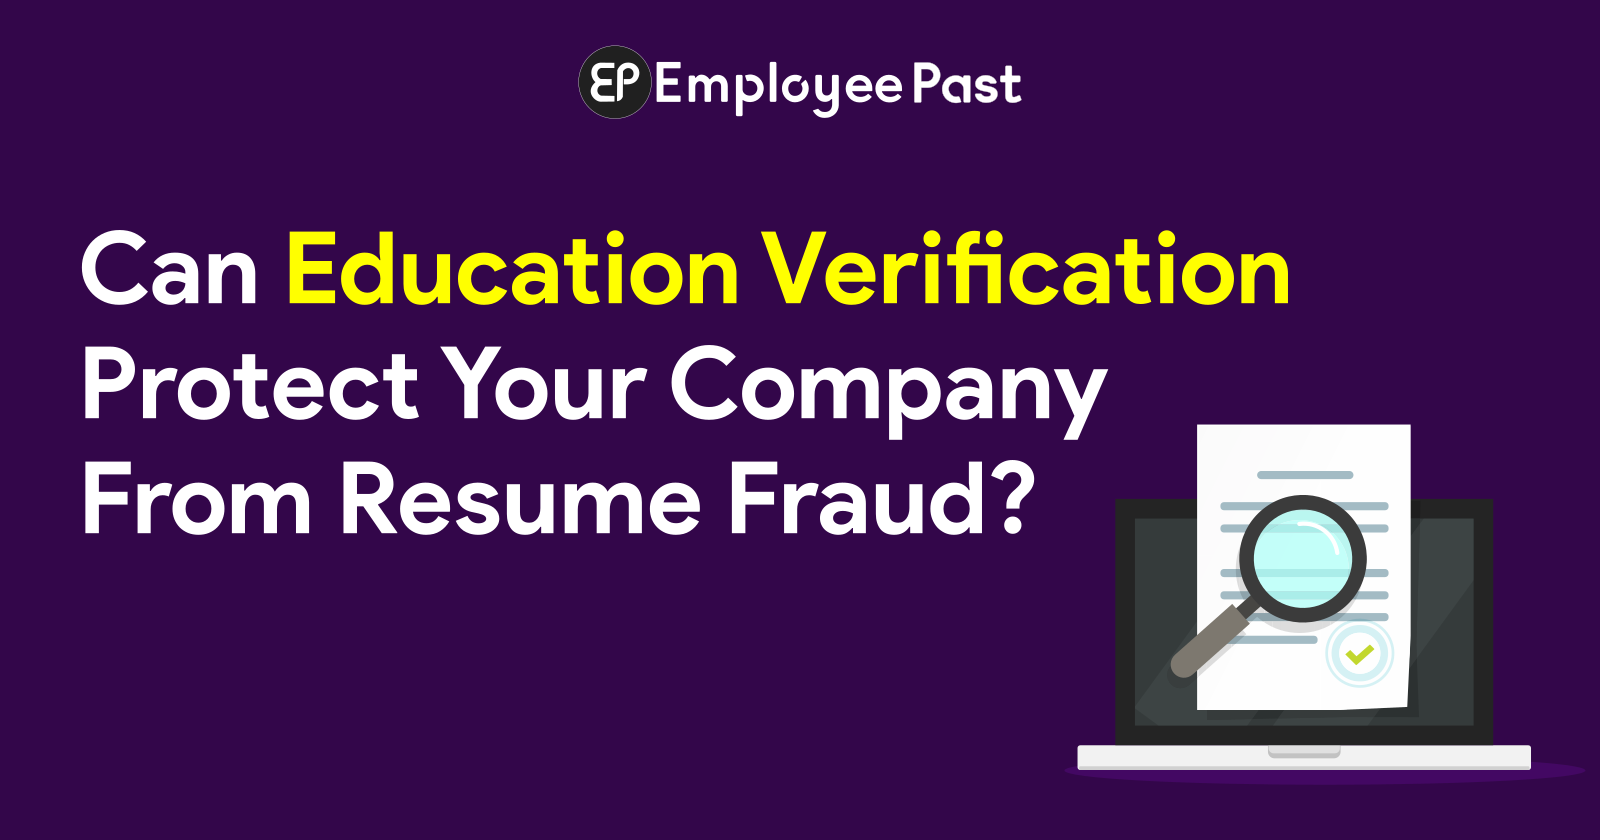 Can Education Verification Protects your Company from Resume Fraud?